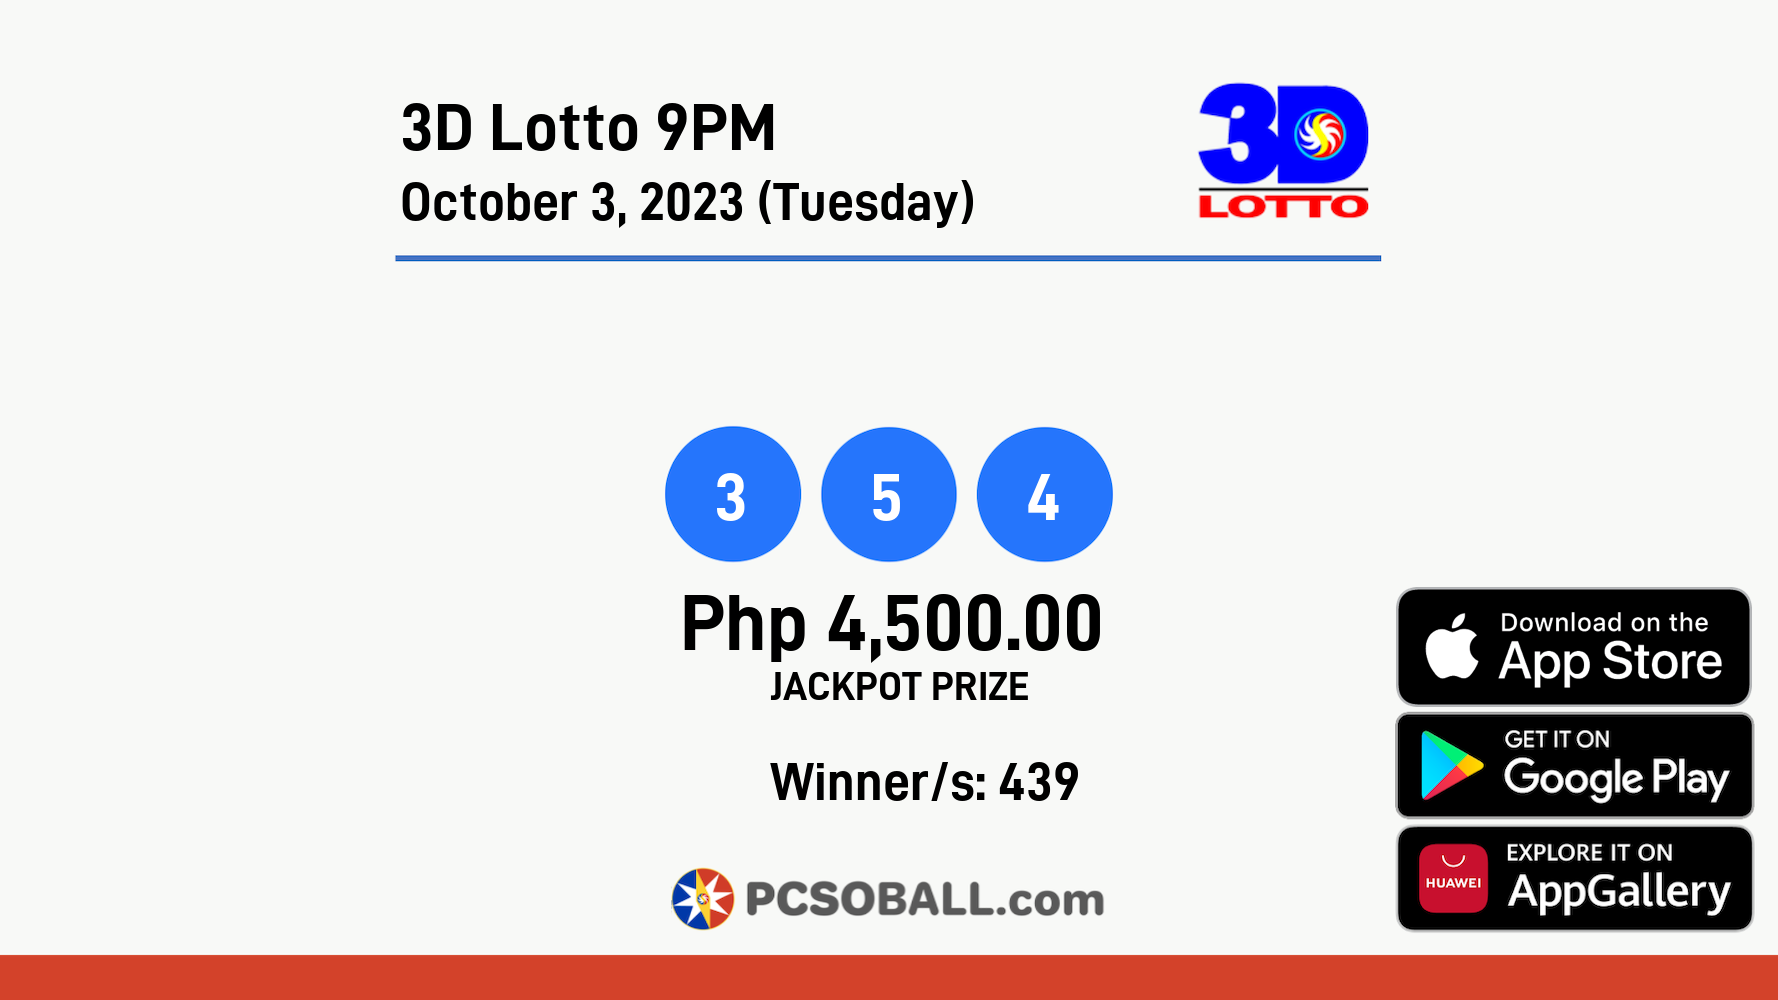 3D Lotto 9PM October 3, 2023 (Tuesday) Result